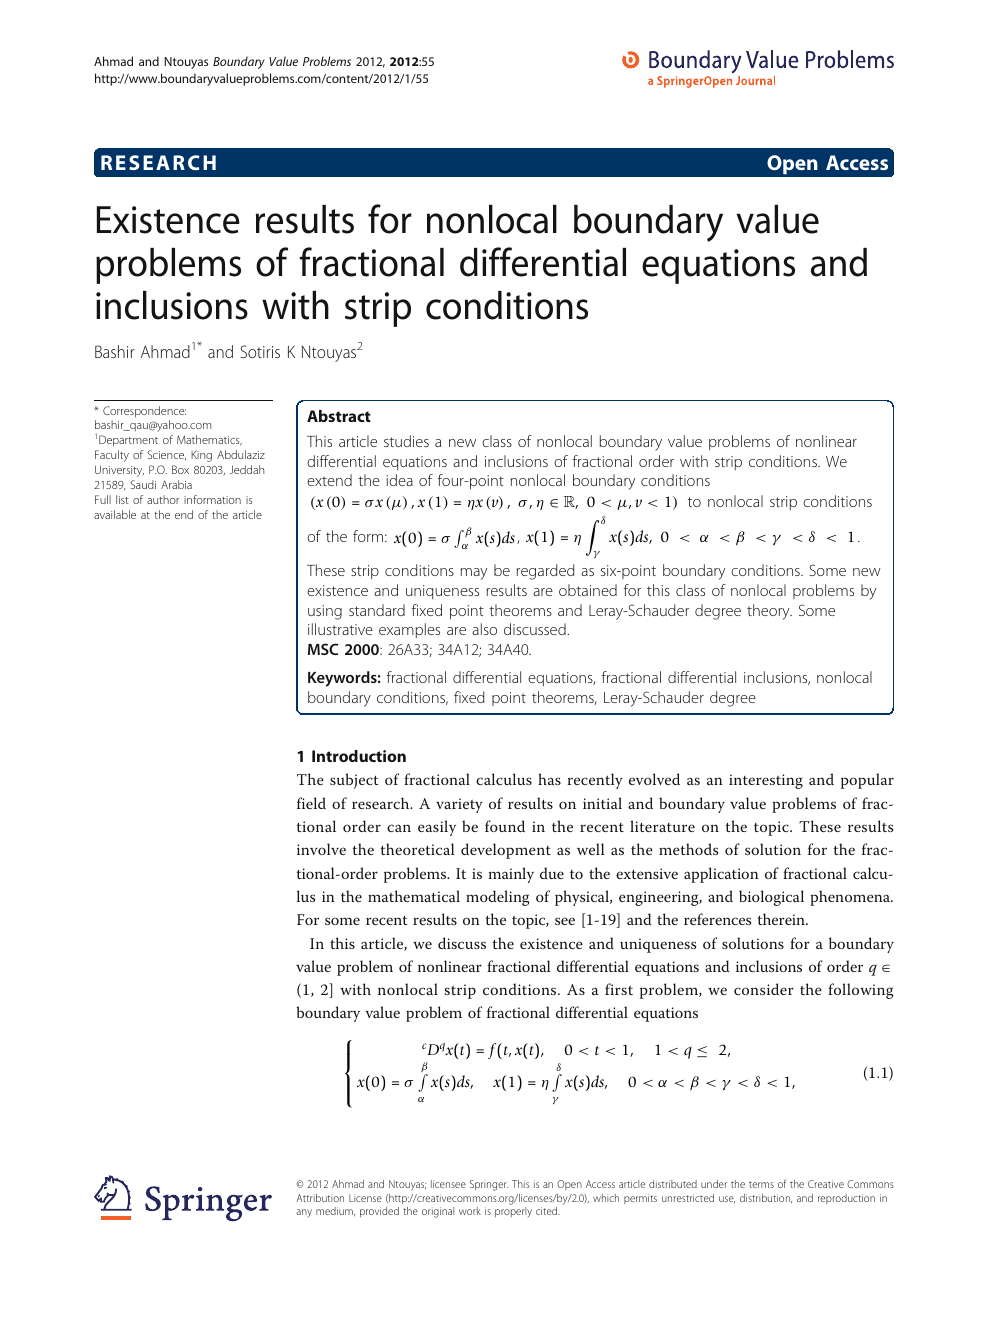 Existence Results For Nonlocal Boundary Value Problems Of Fractional Differential Equations And Inclusions With Strip Conditions Topic Of Research Paper In Mathematics Download Scholarly Article Pdf And Read For Free On